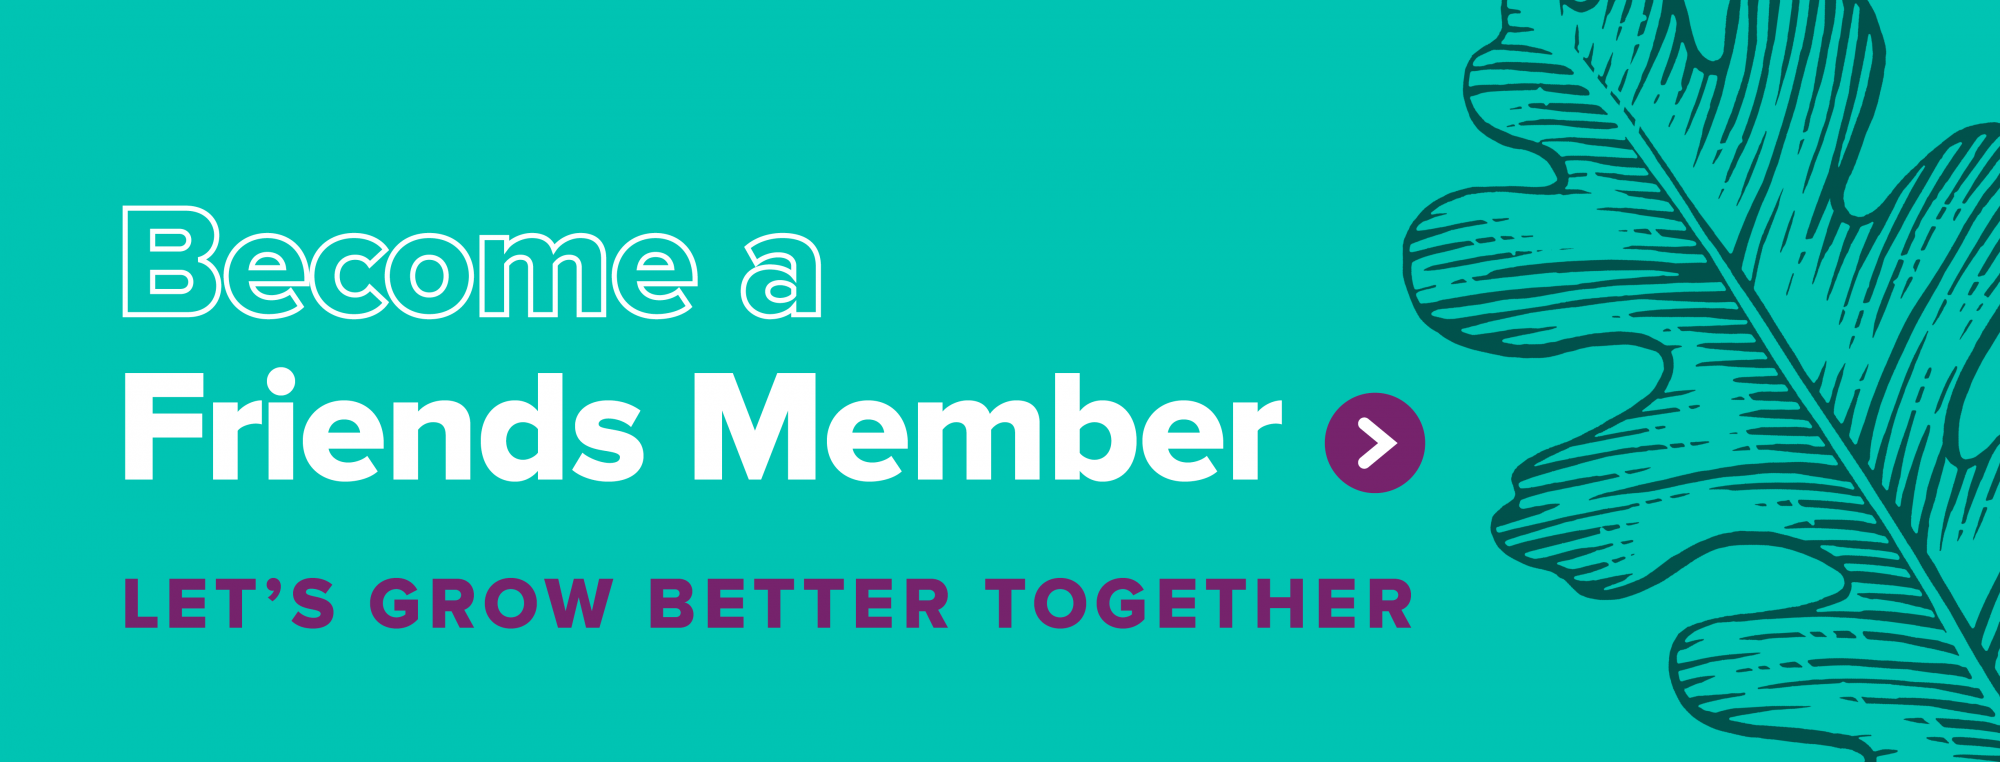 Become a Friends Member - Let's grow better together